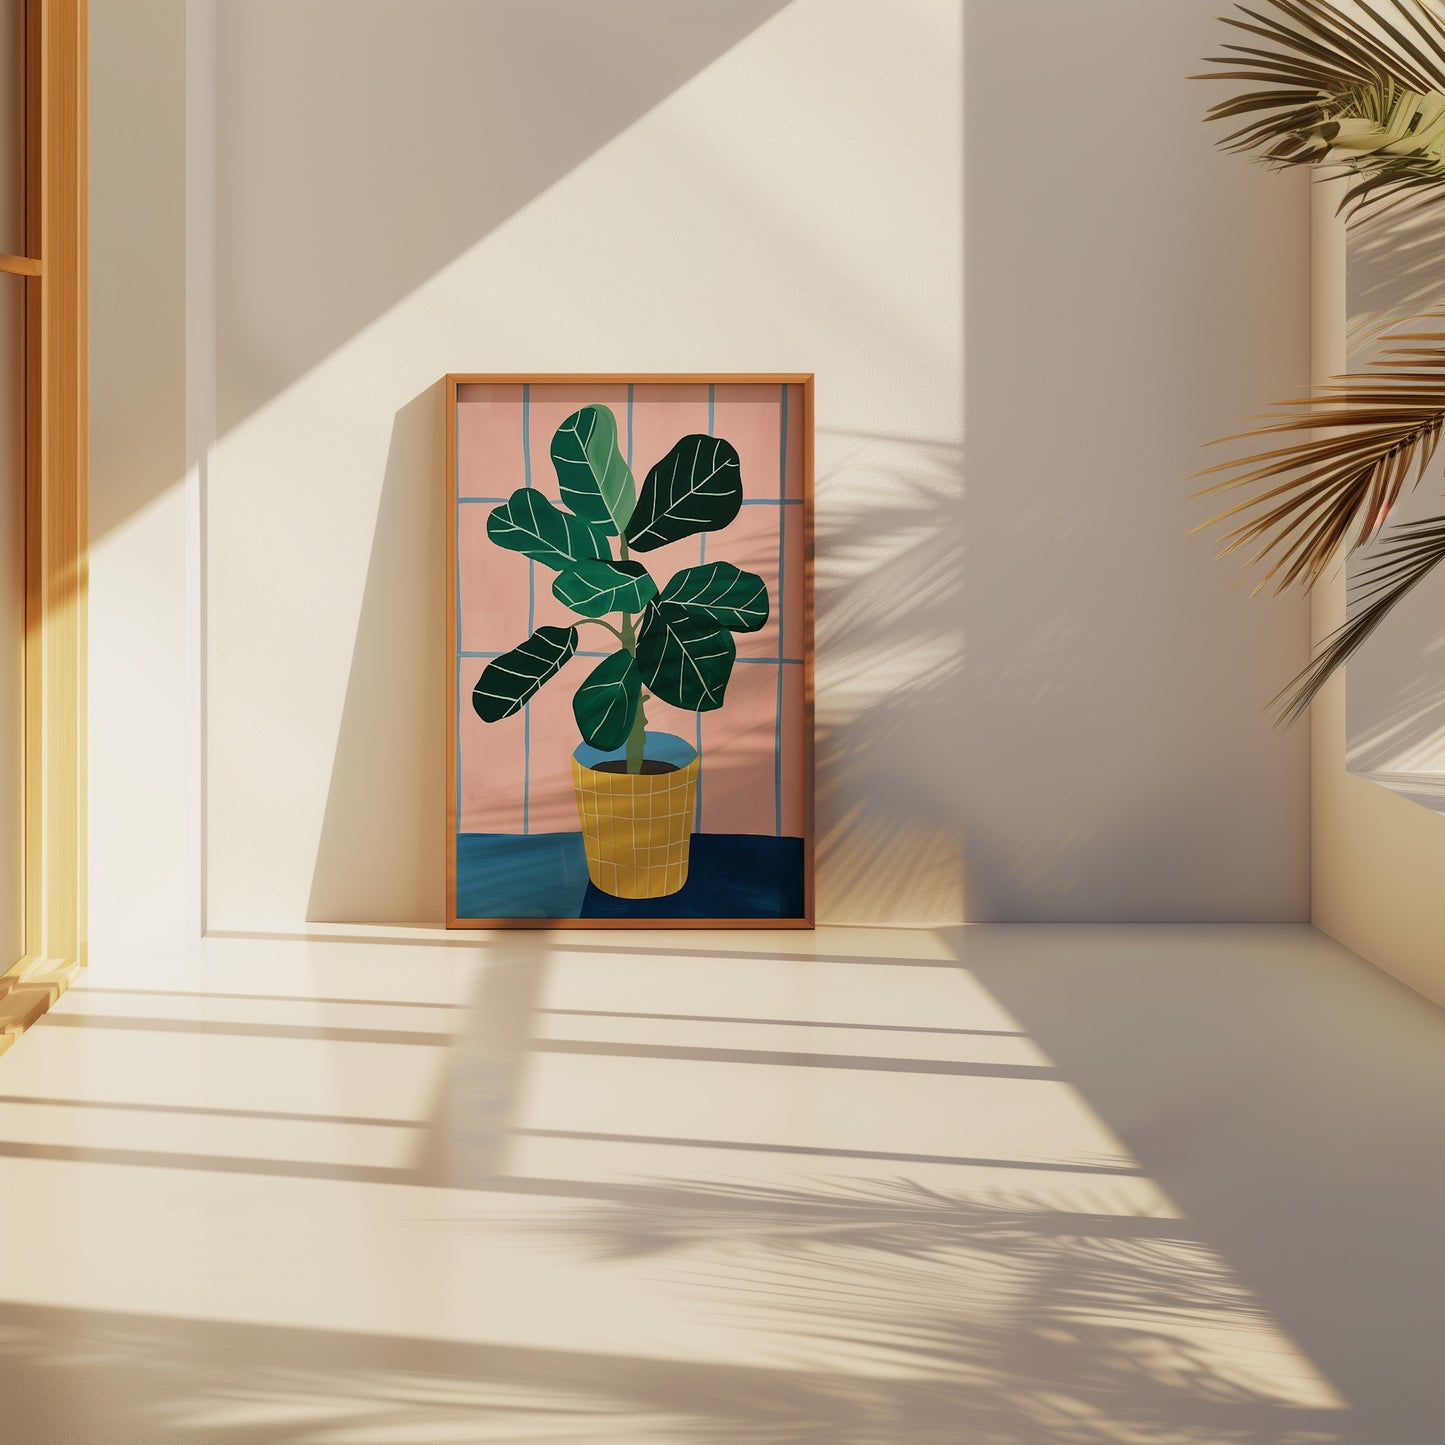 A potted plant illustration with shadows in a sunny room.